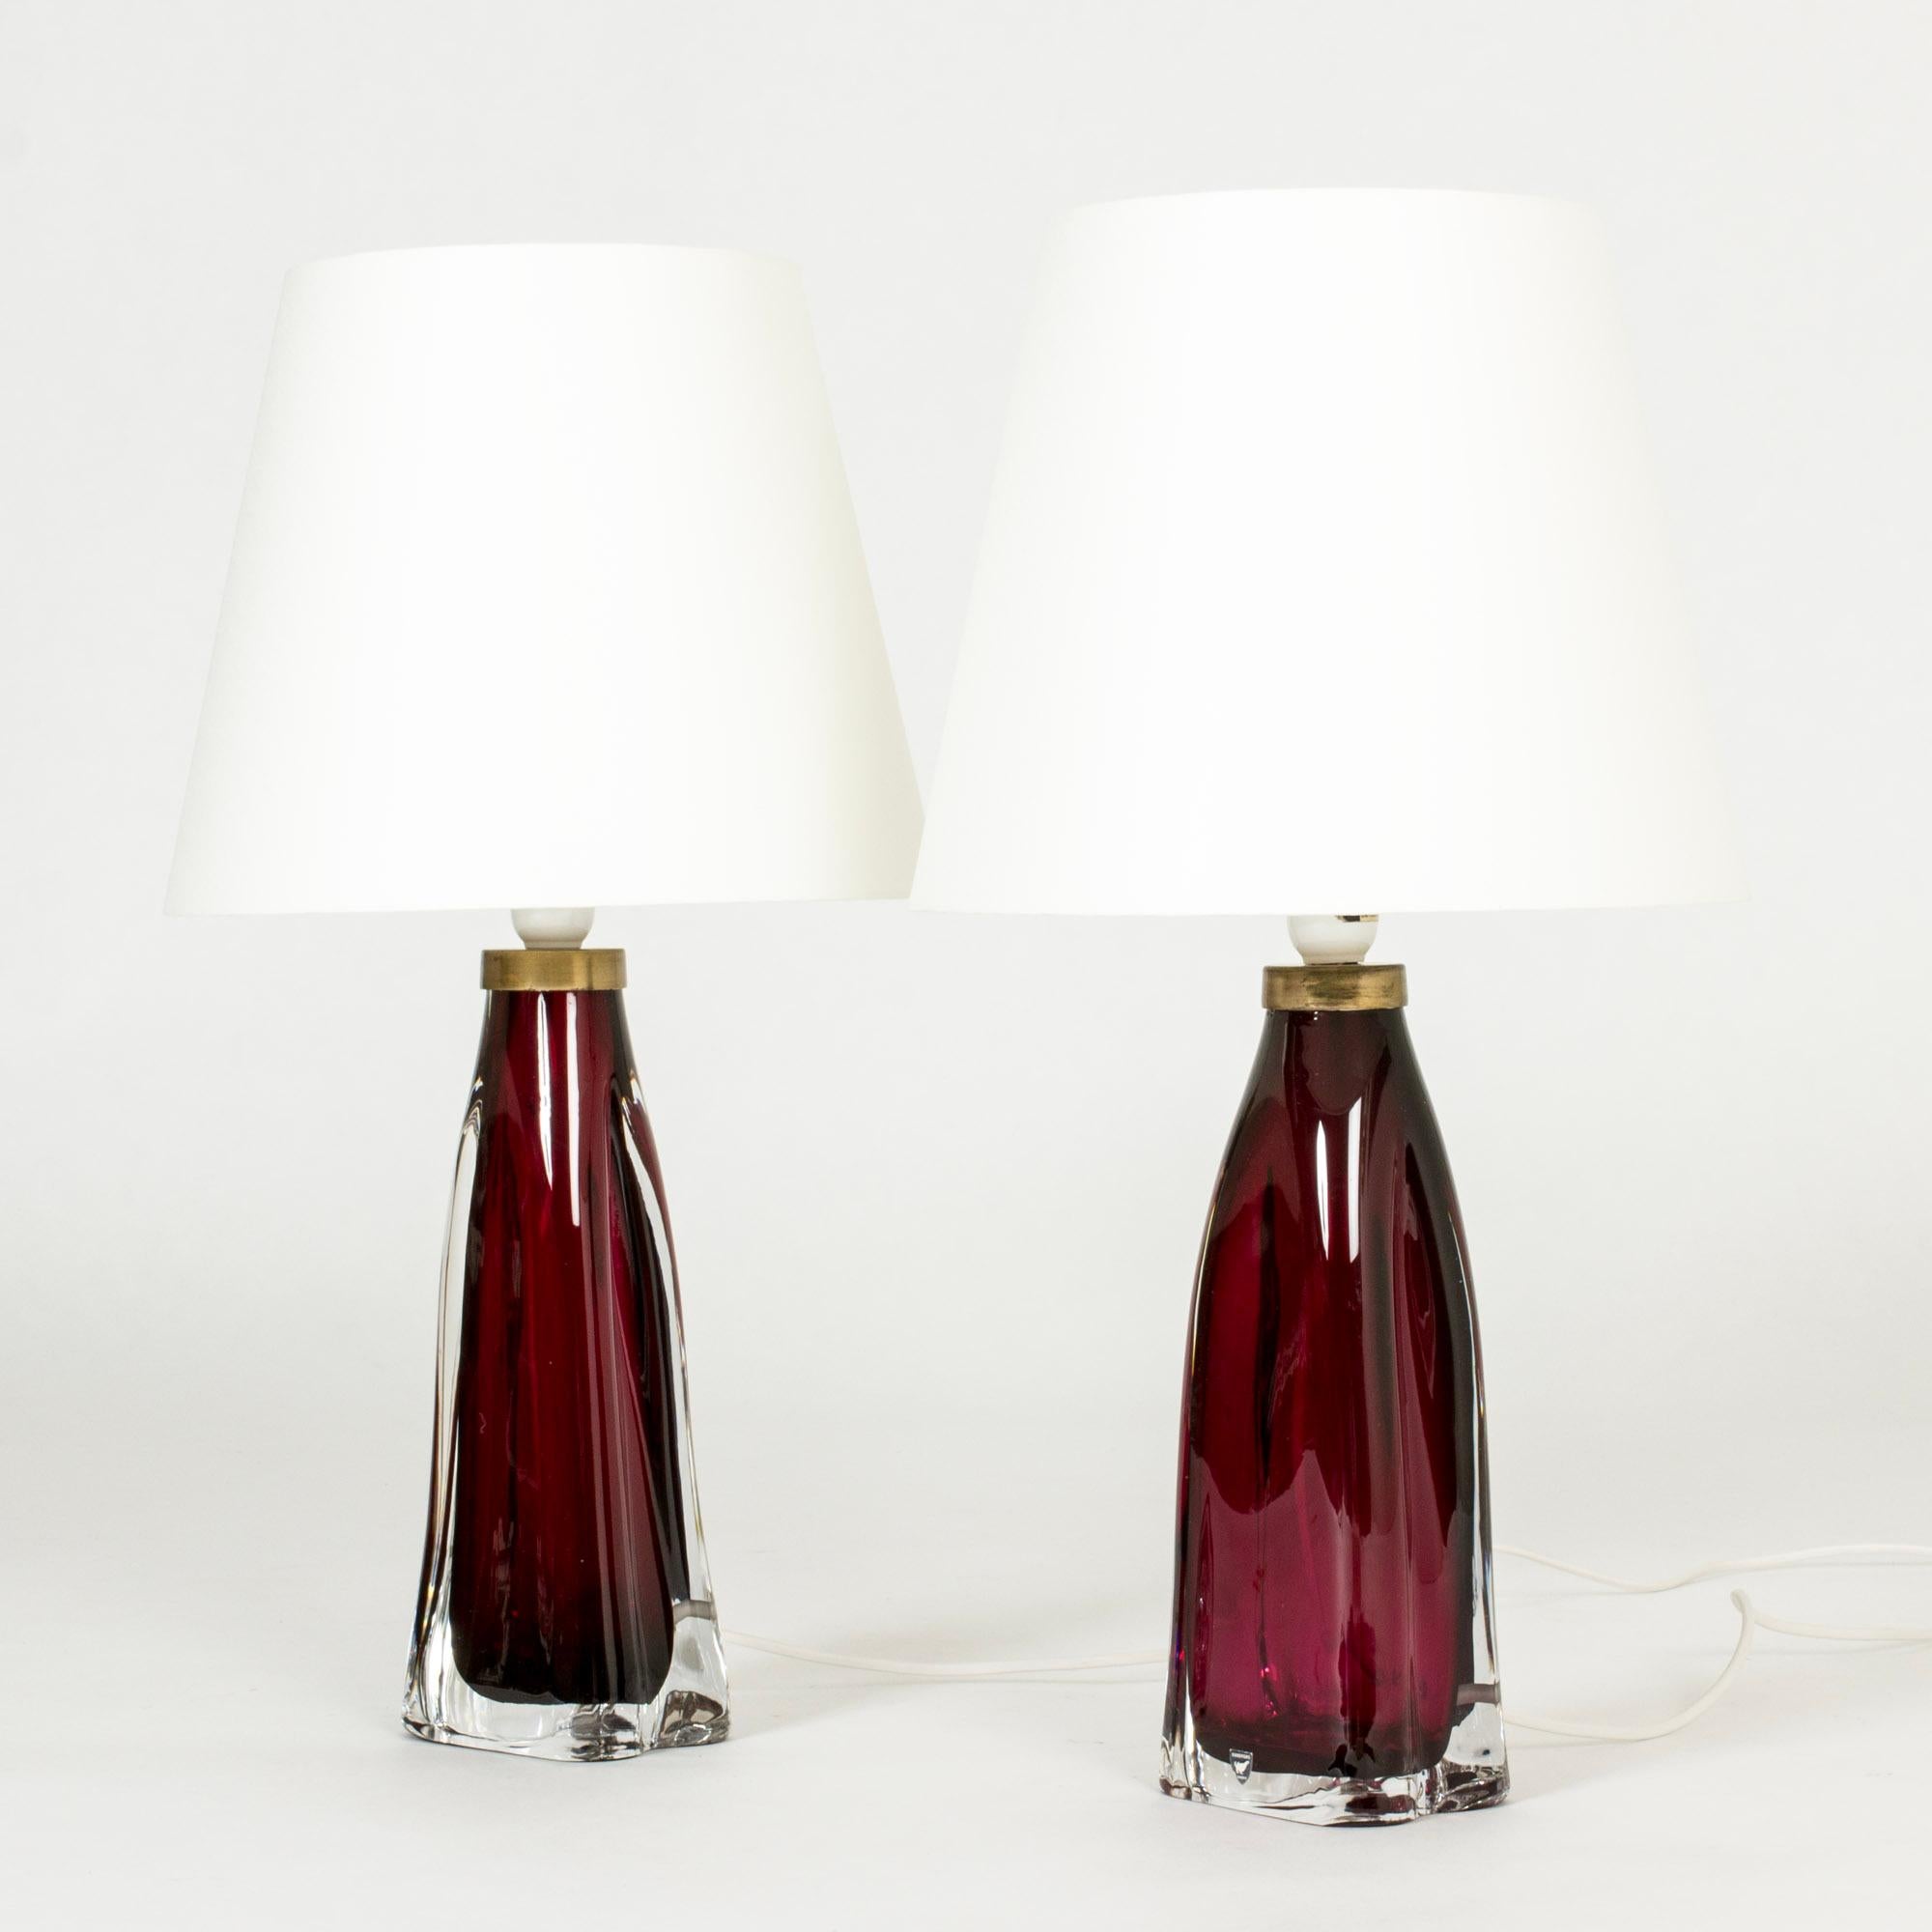 Swedish Midcentury Glass Table Lamps by Carl Fagerlund, Orrefors, Sweden, 1960s For Sale